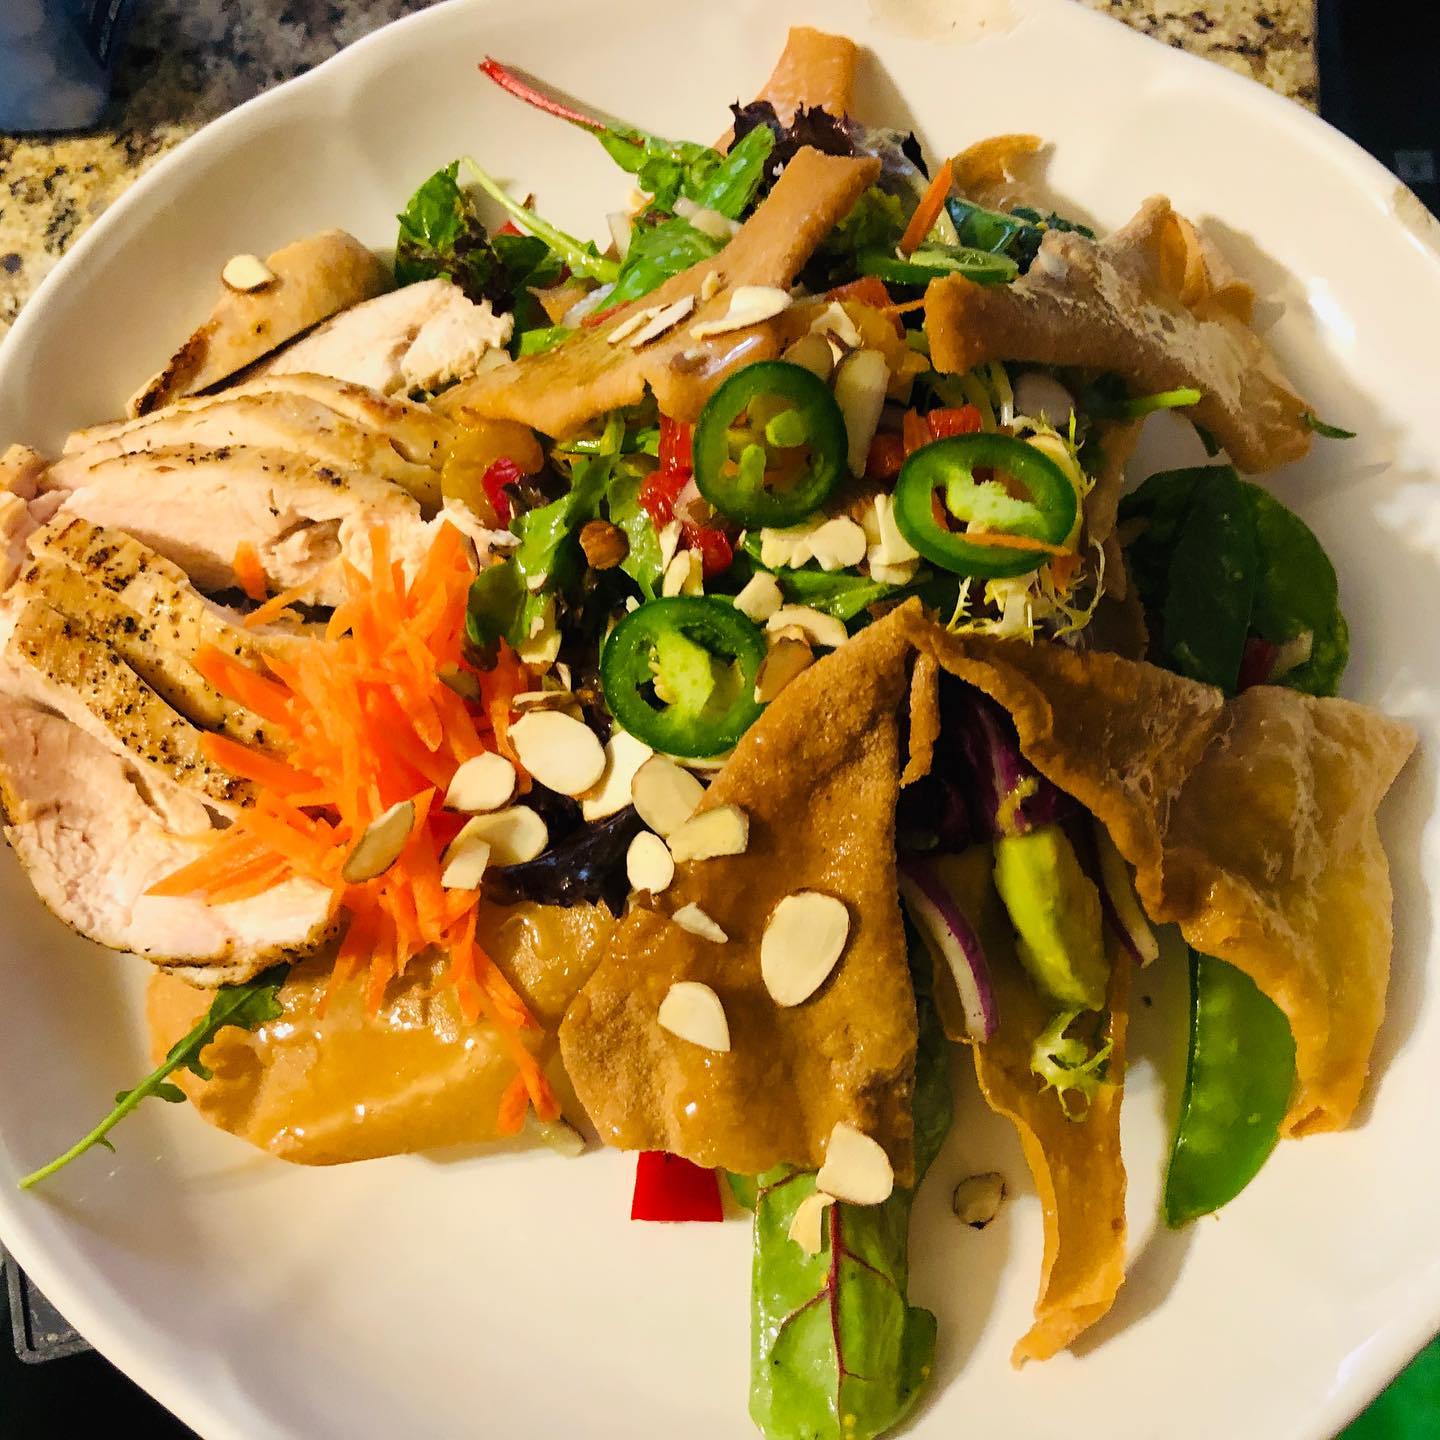 It's been a while since my last post. But really considering getting back into it. Soon enough I'm sure. Quickly snapped a pic of this Luau Chicken Salad I made last night with crunchy honey wontons. Absolutely delicious. Hope everyone is well. Have been missing you guys!

#dinner #chicken #salad #winnipegeats #wpgeats #winnipeg #healthyfood #healthylifestyle #healthyliving #farmtotable #farmtofork #forkyeah #cooking #food #foodporn #instafood #homemade #foodphotography #recipe #lunch